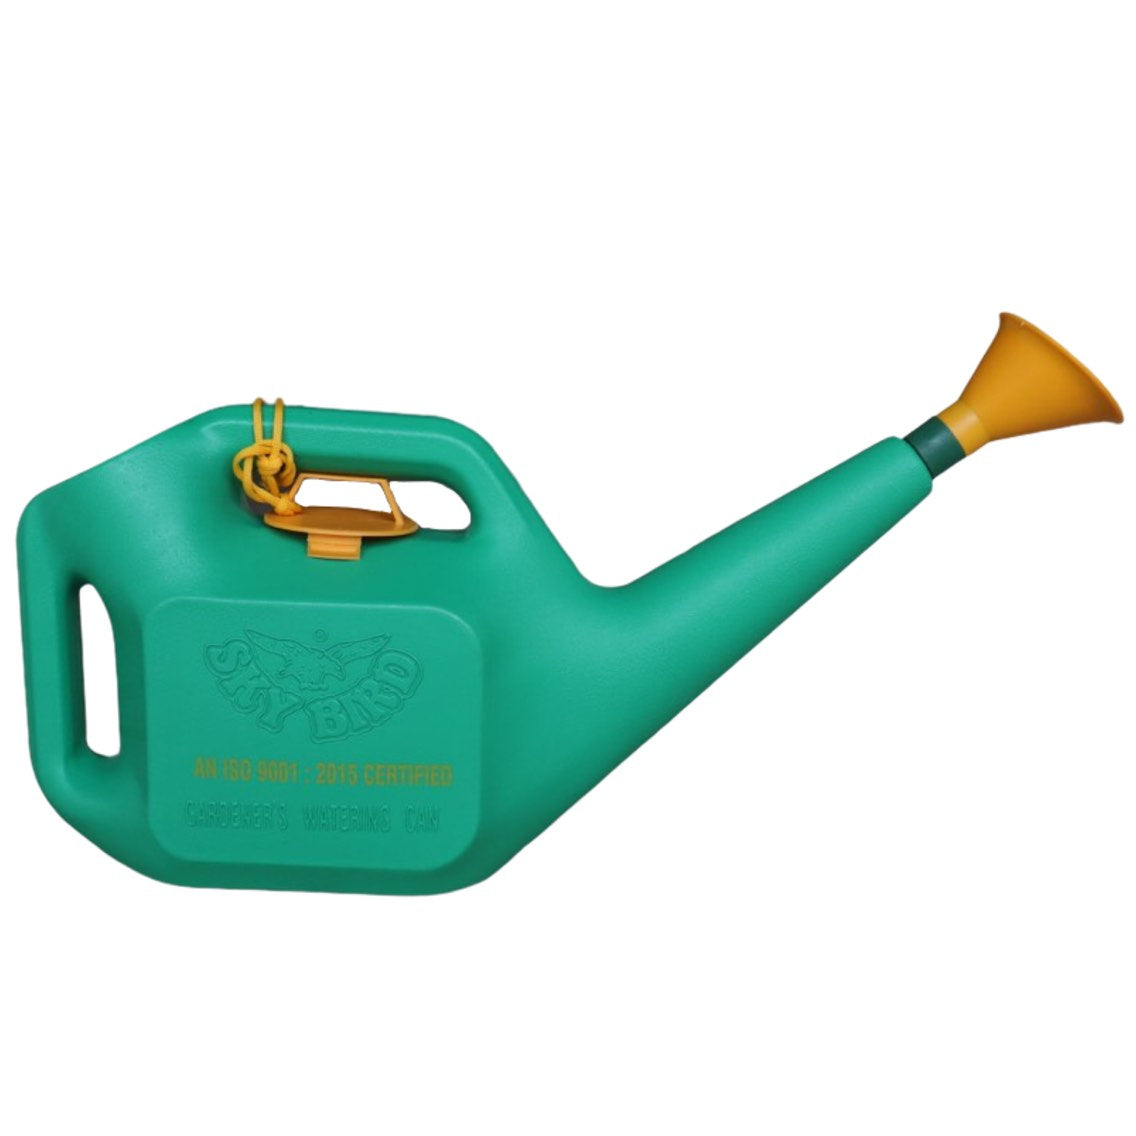 5 Litre Premium Plastic Watering Can for Plants and Gardens (ISO Certified)